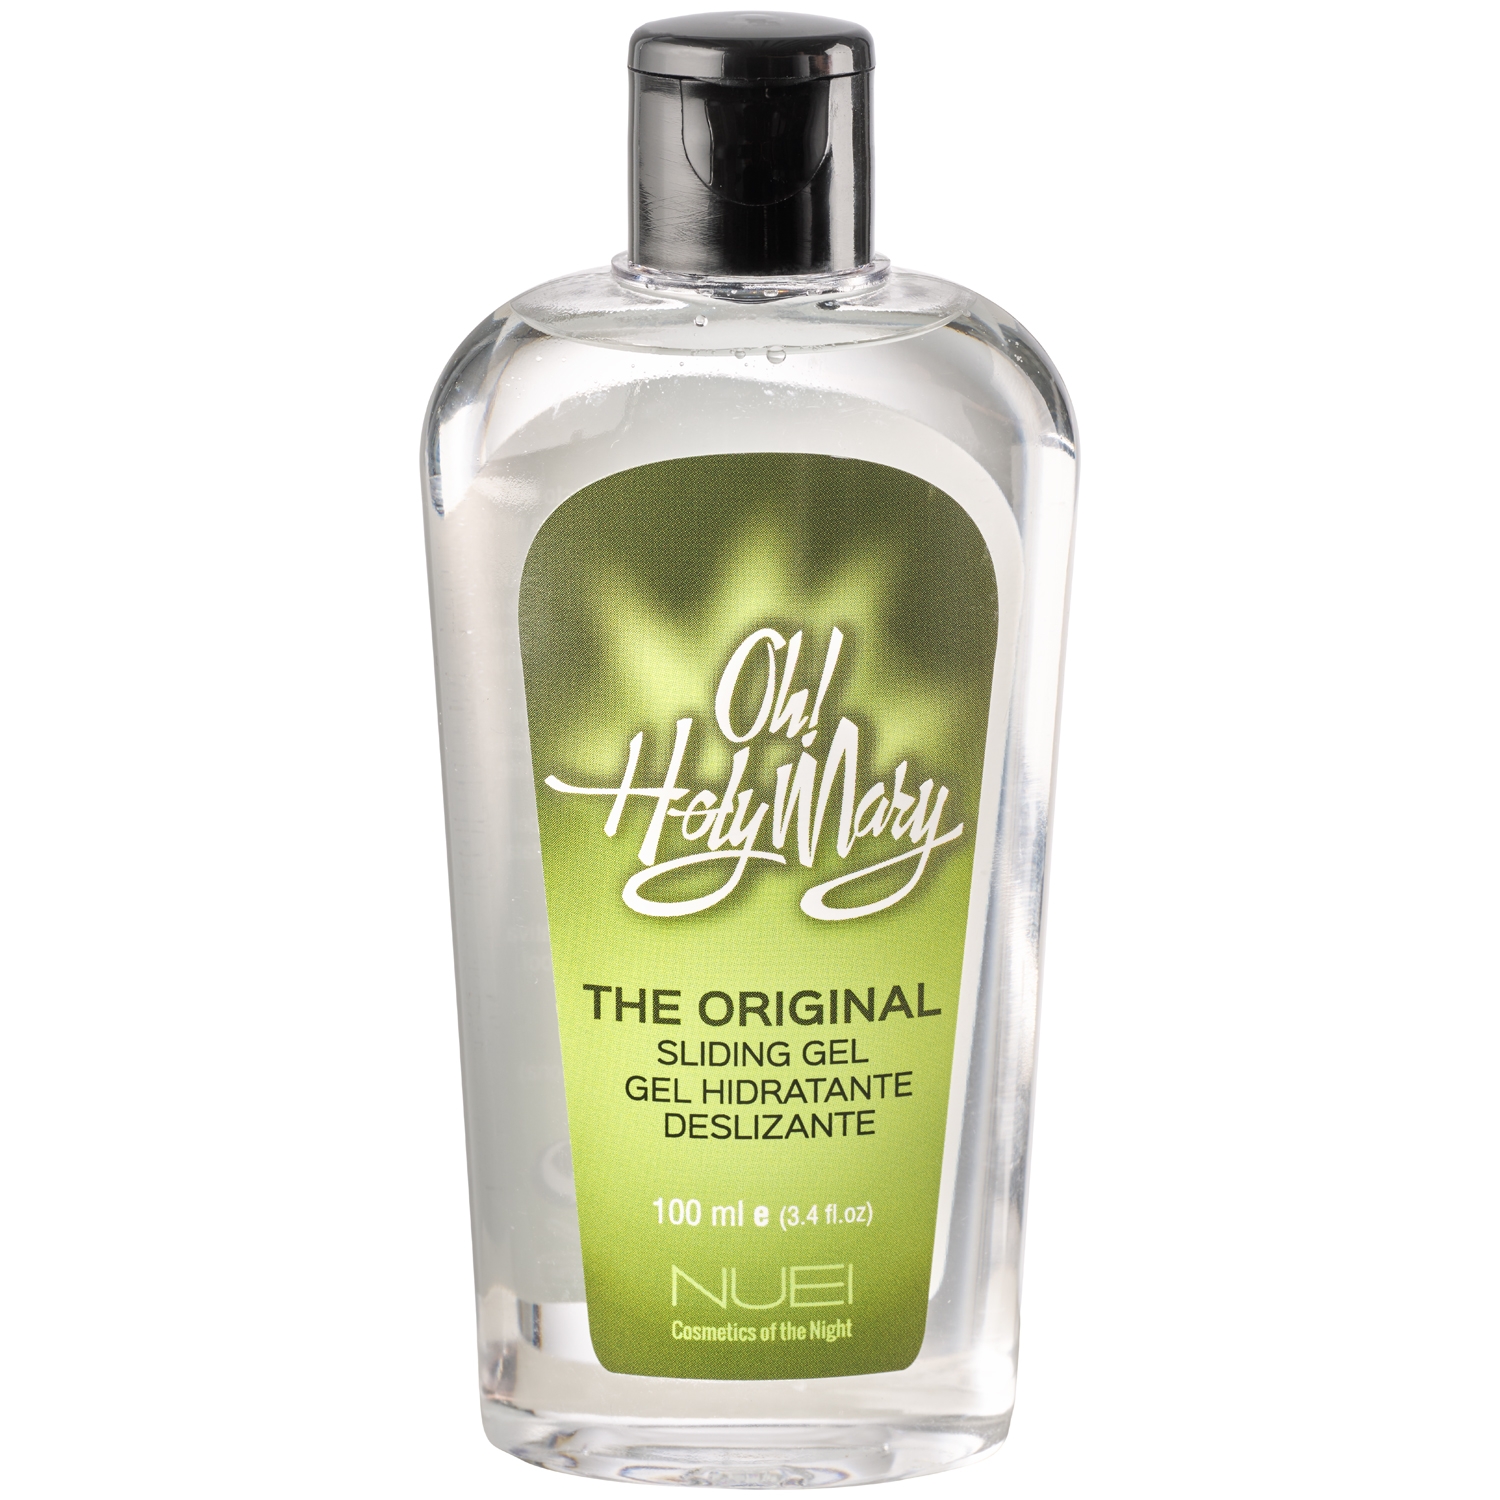 Oh! Holy Mary The Original Sliding Gel 100 ml - Clear thumbnail